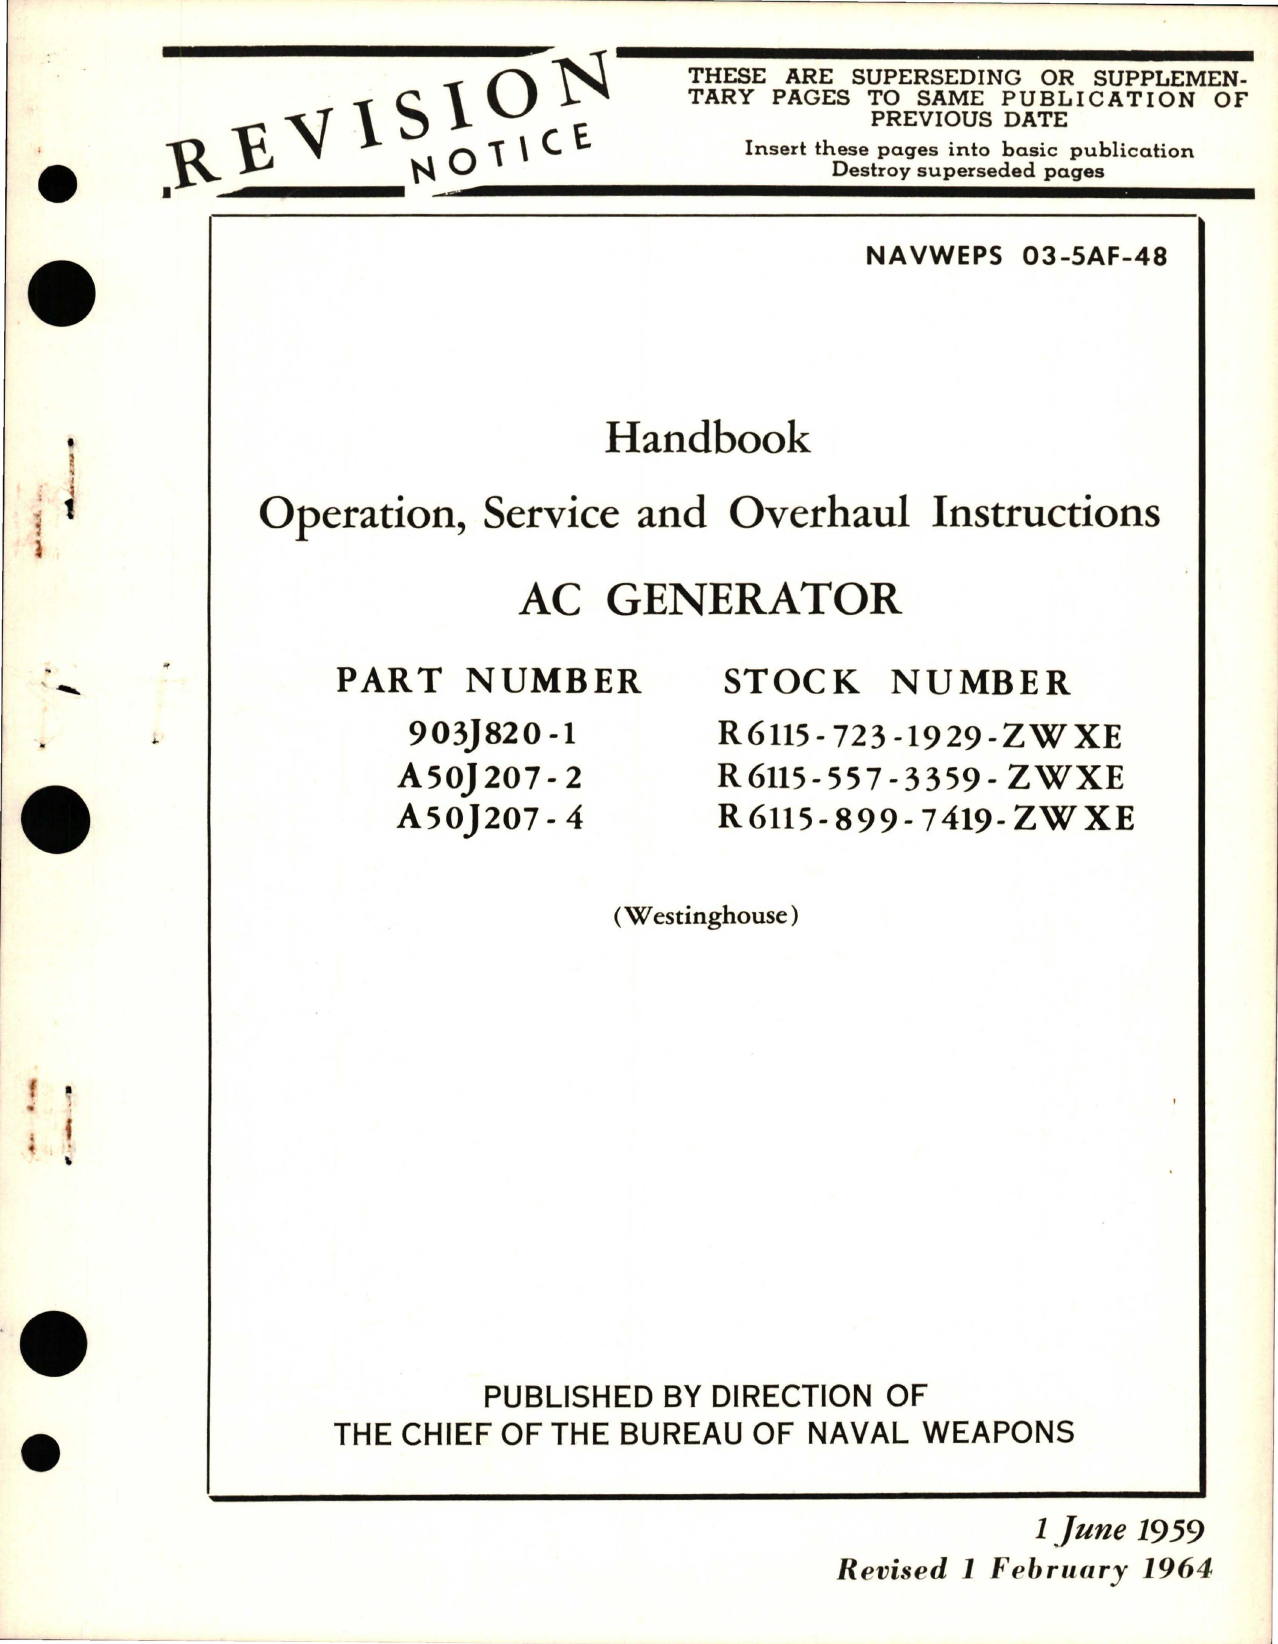 Sample page 1 from AirCorps Library document: Operation, Service and Overhaul Instructions for AC Generator - Parts 903J820-1, A50J207-2, and A50J207-4